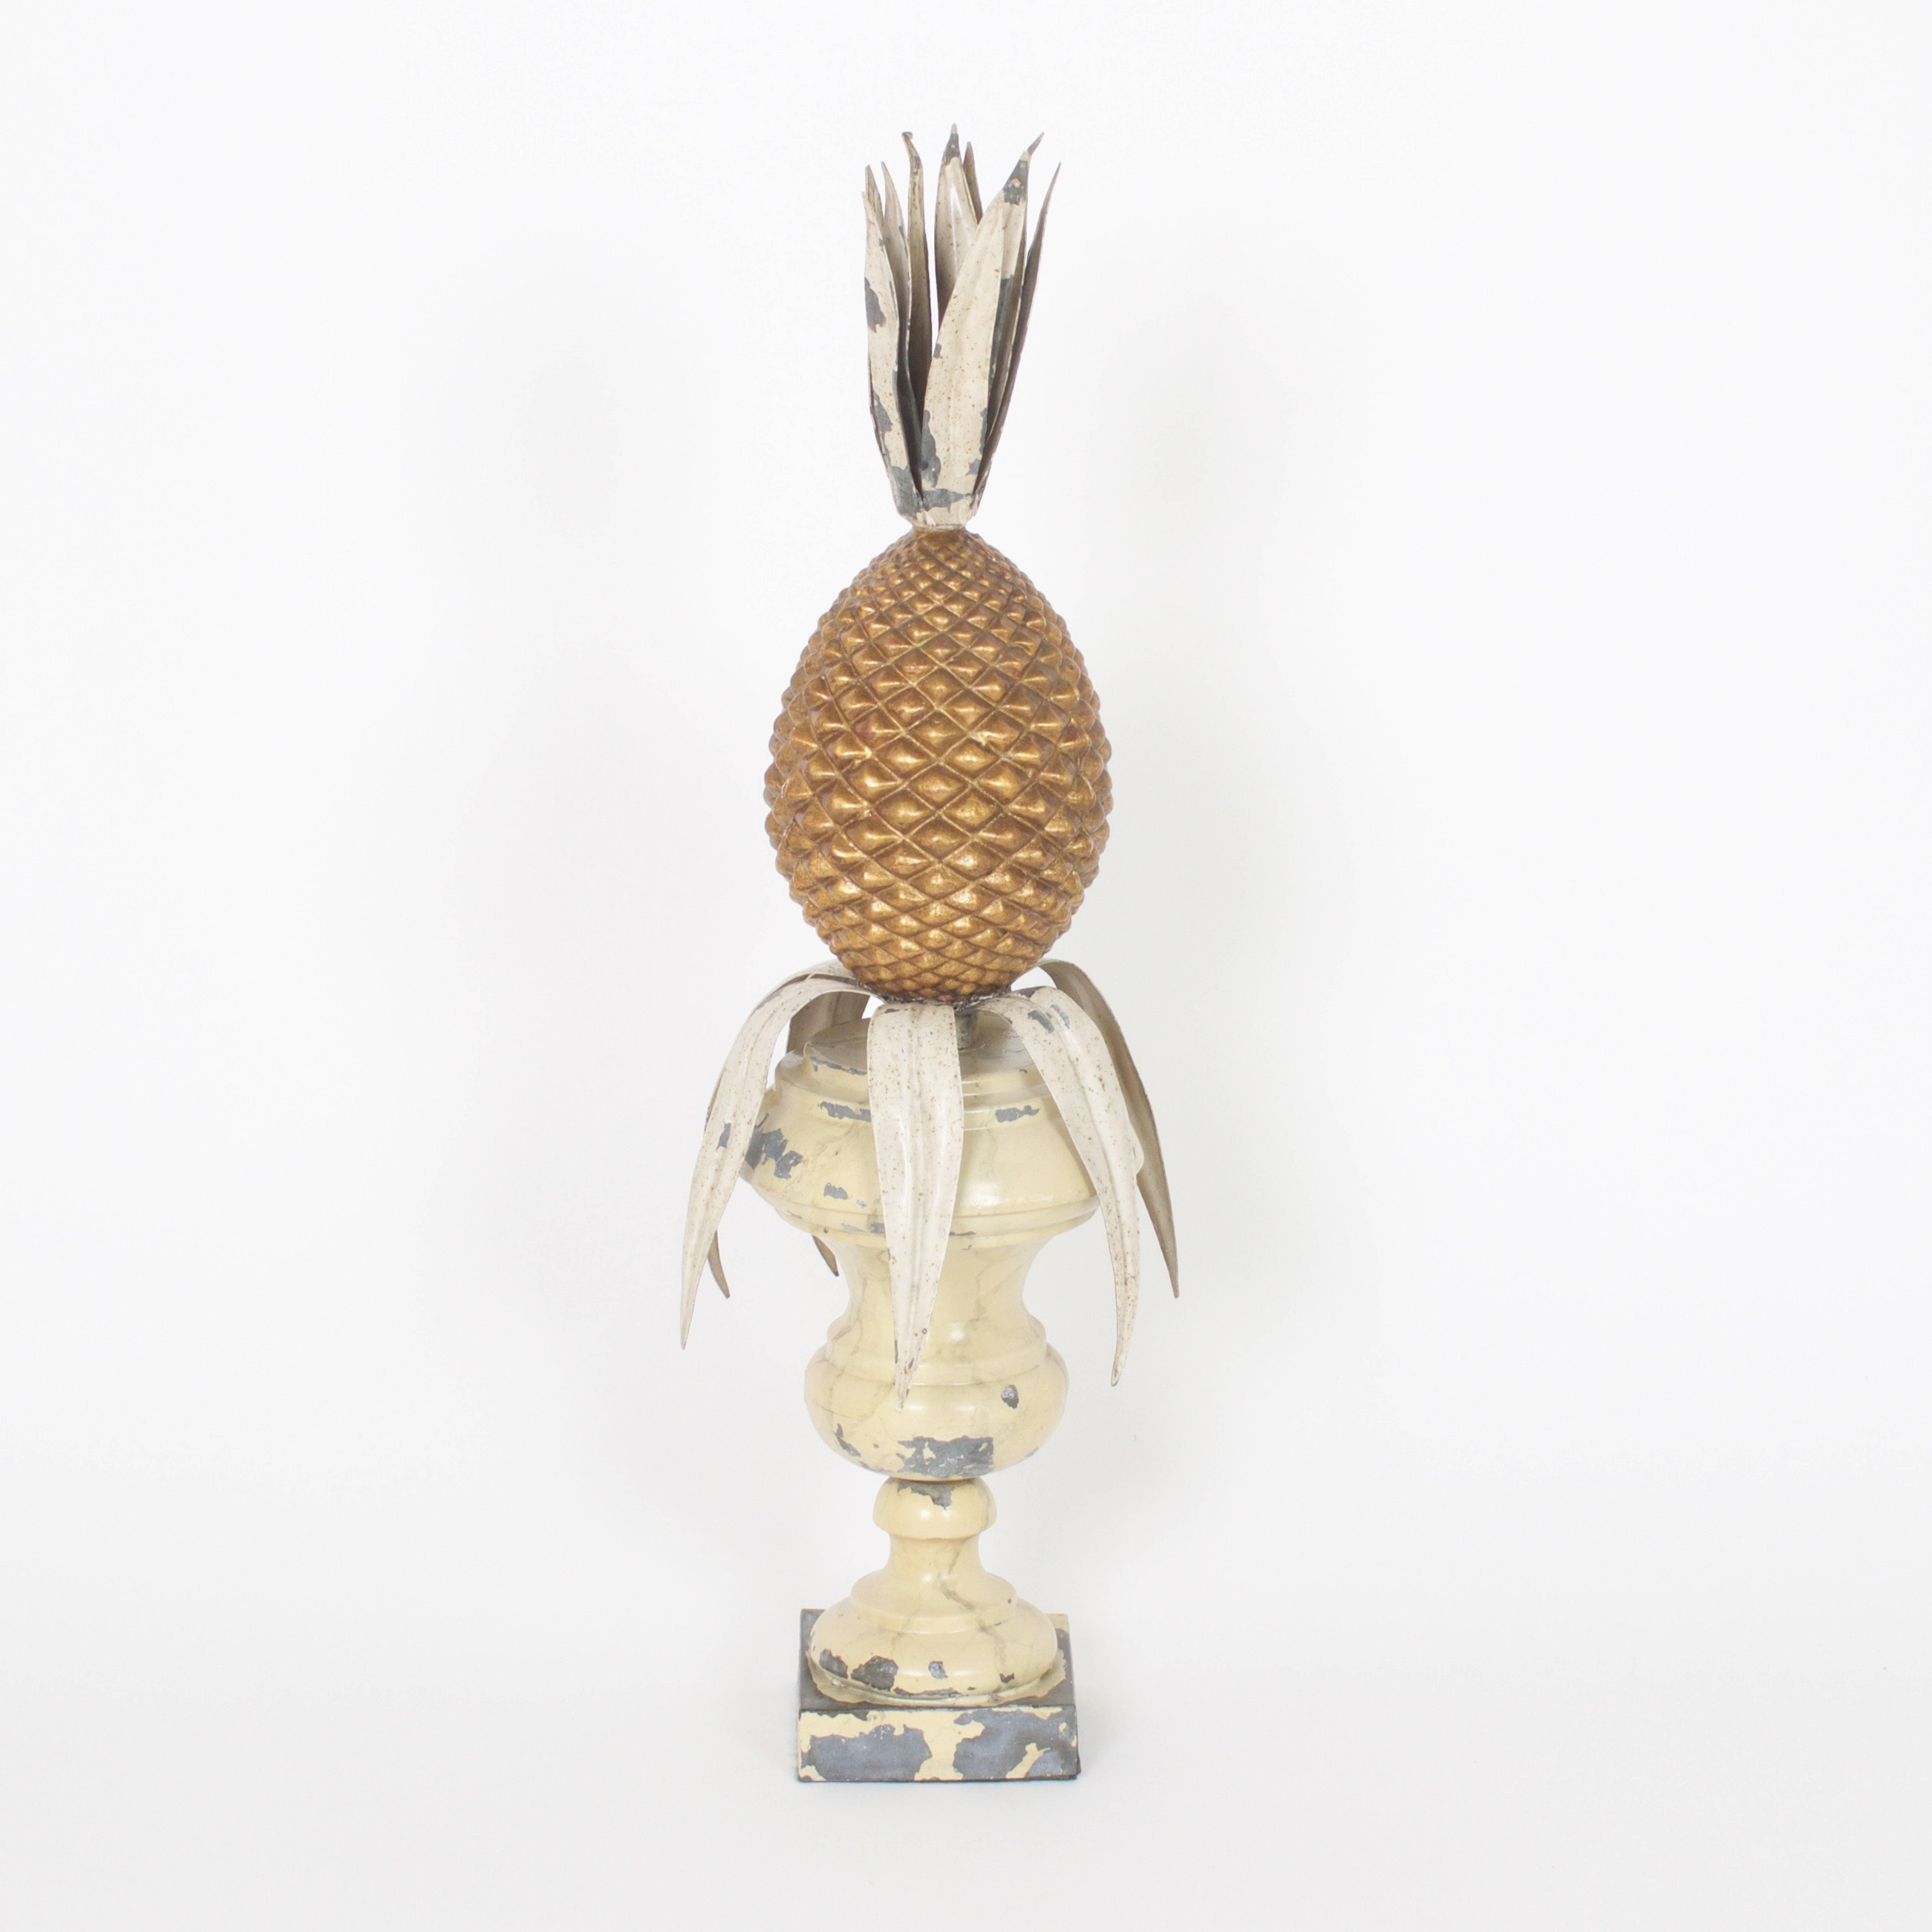 The pineapple as a symbol of hospitality is a Classic design motif. These bold antique tole pineapples are gold leaf with weathered painted tin leaves set in faux marble painted tin urns that have an acquired sense of time.

.
    